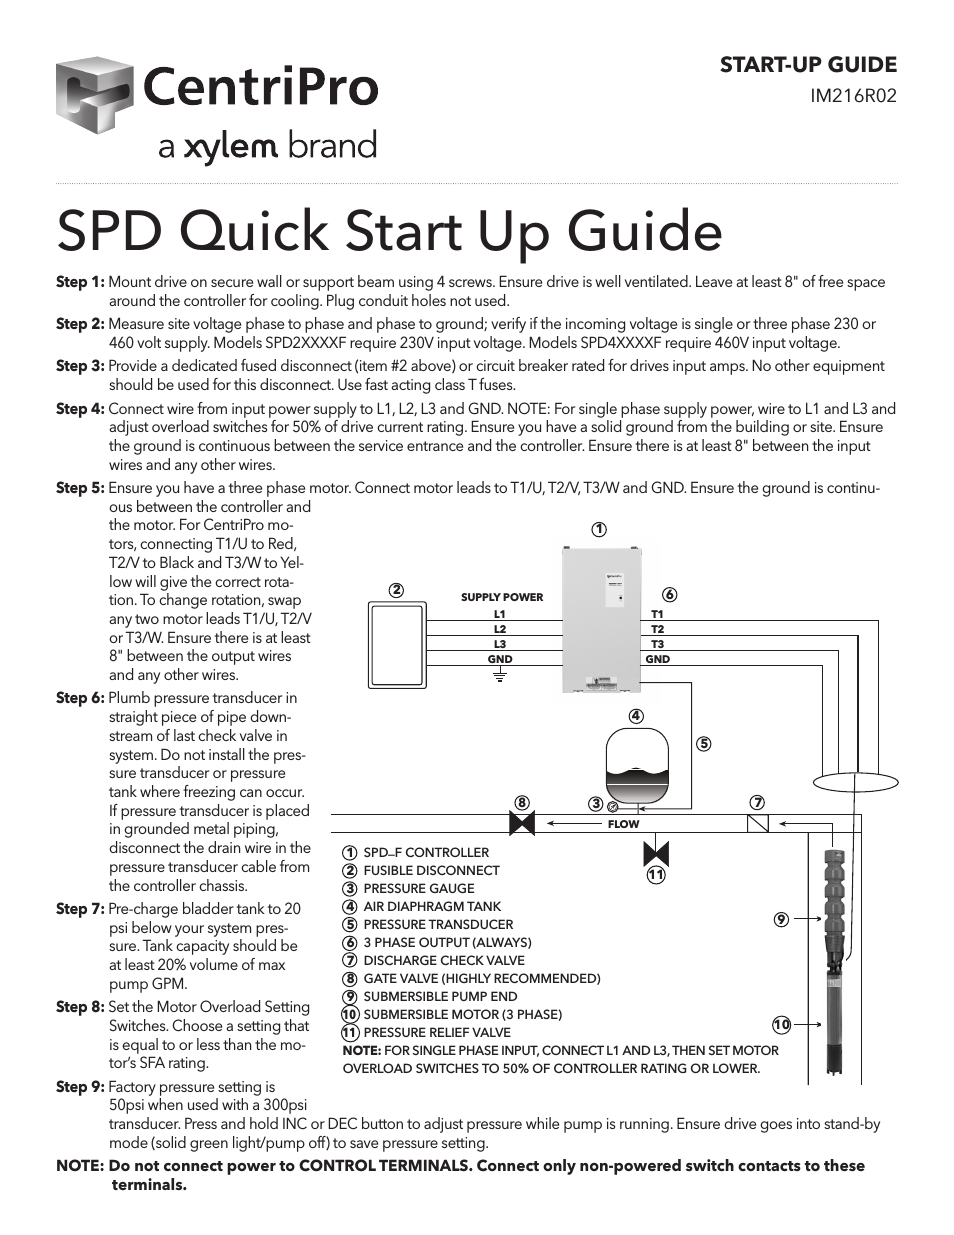 IM216 R2 S-Drive Quick Start Up Guide